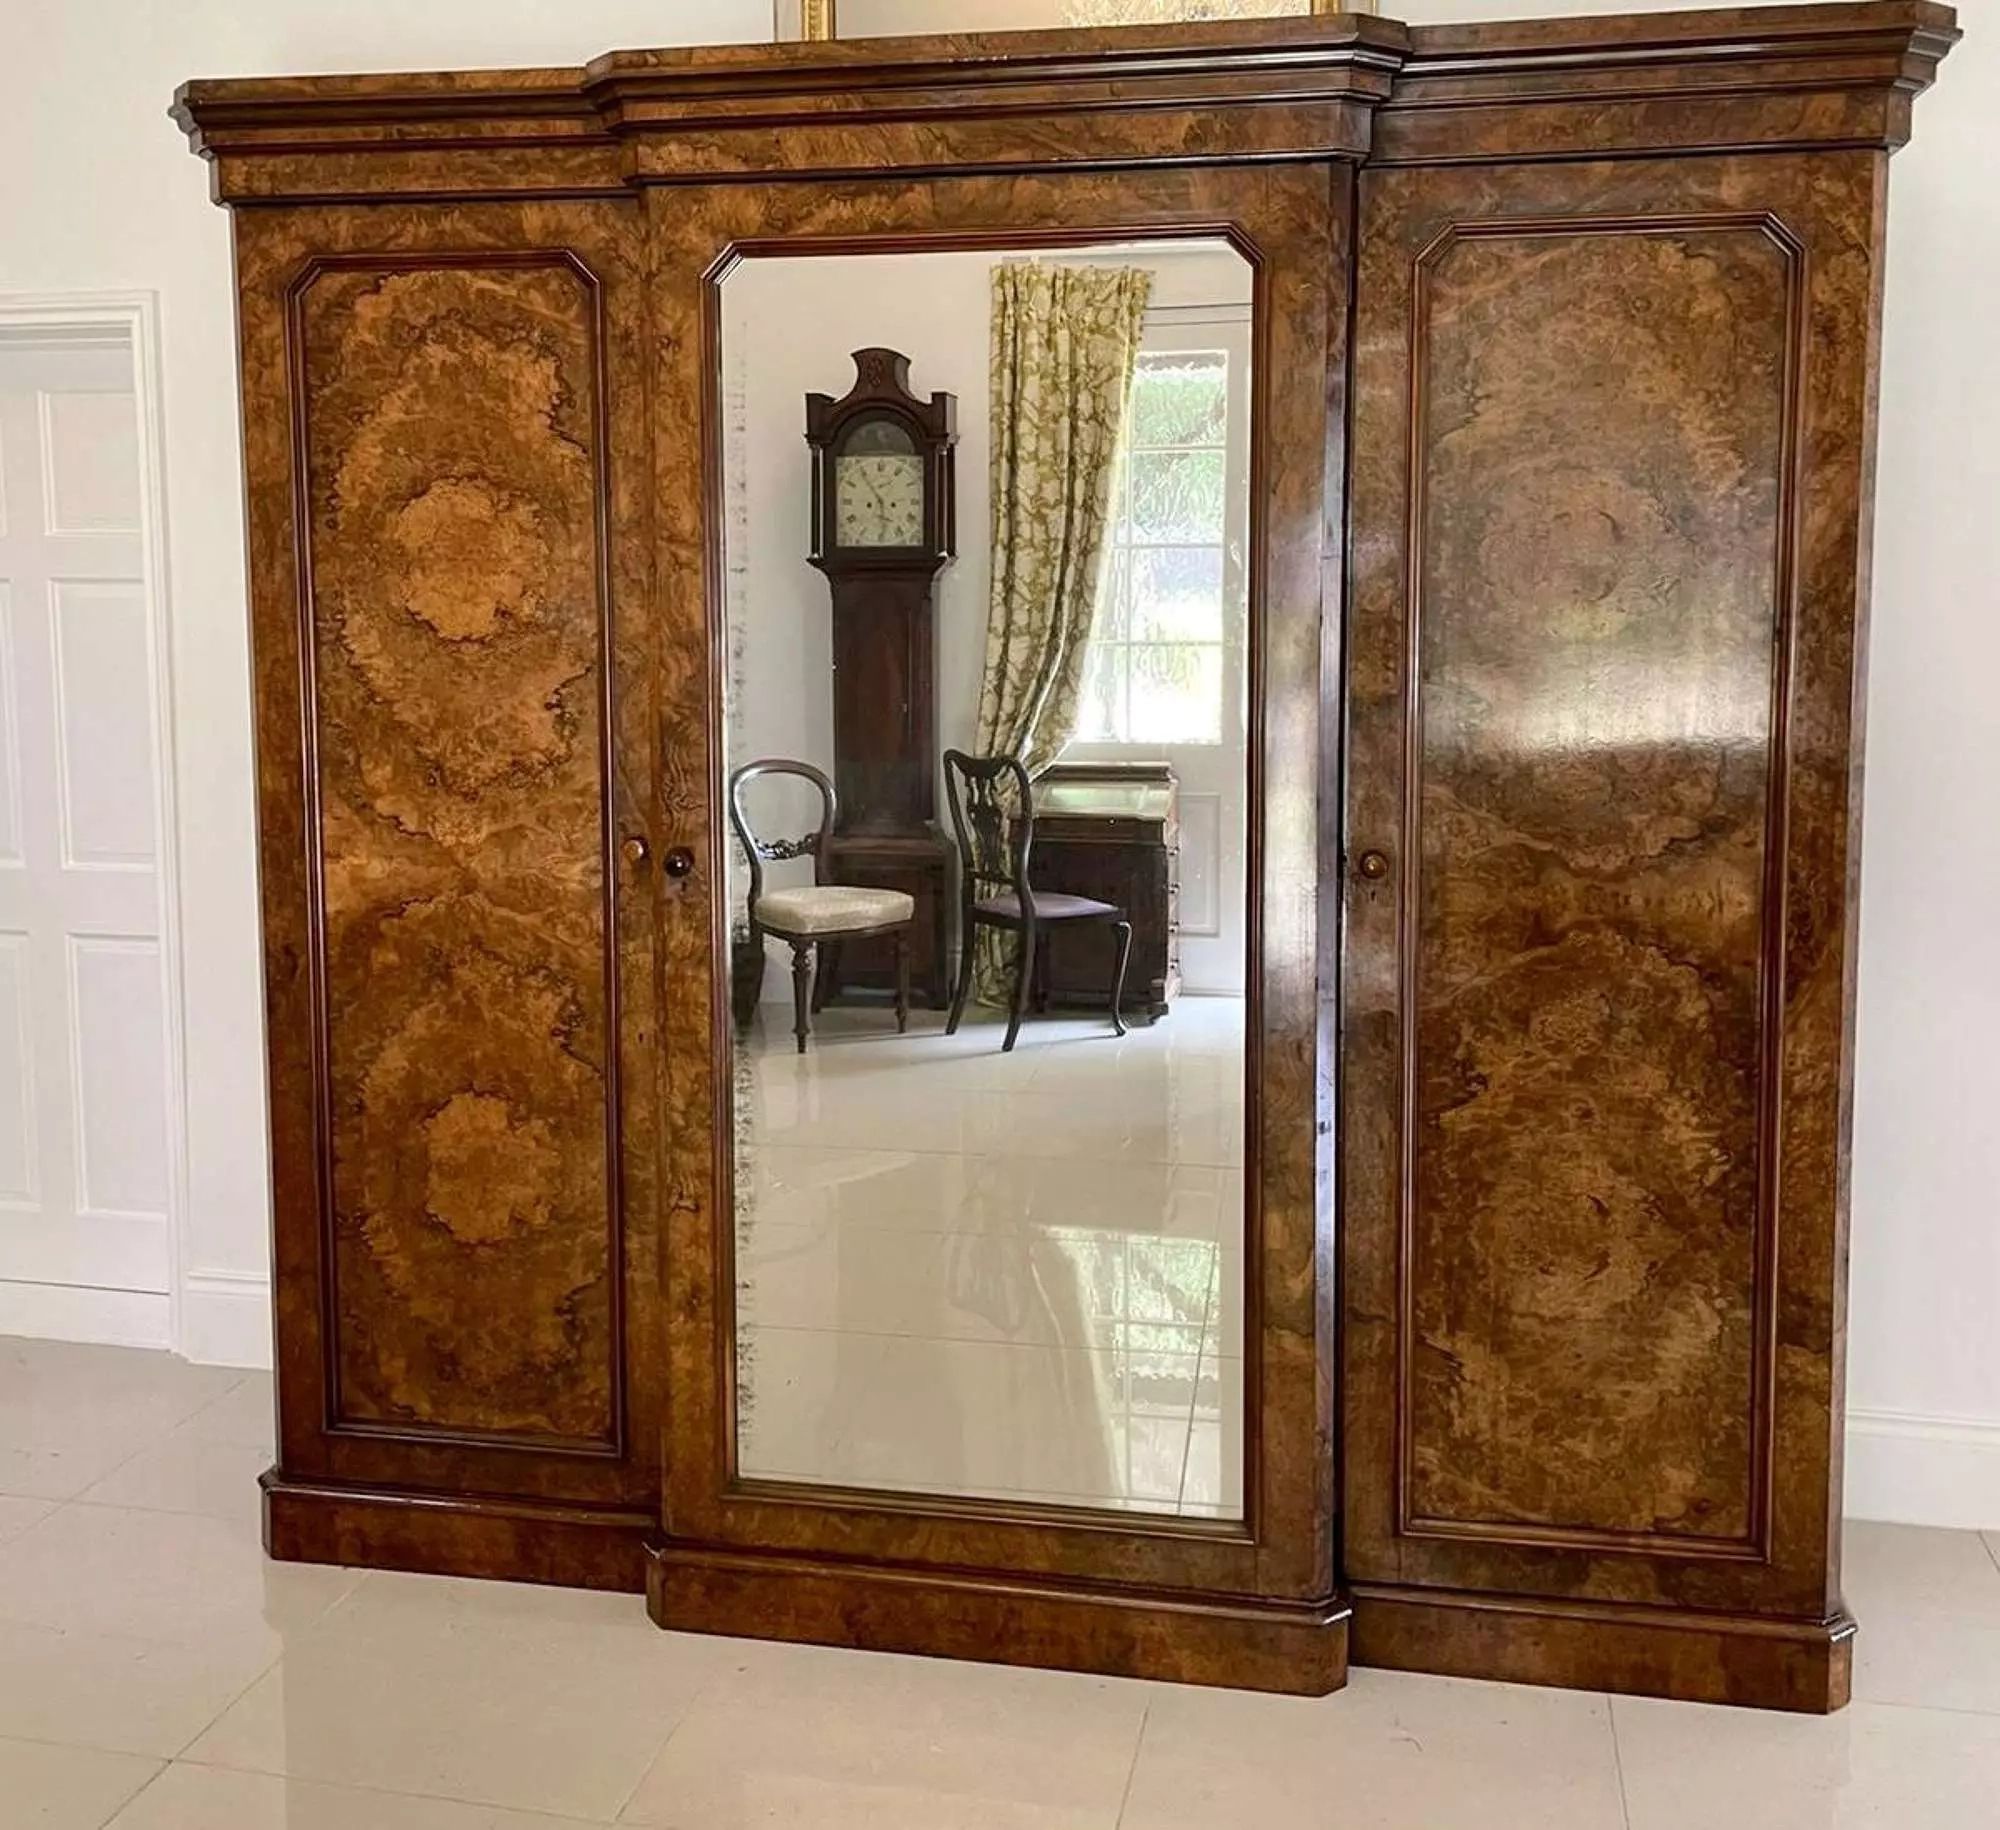 Outstanding Quality Large Antique Victorian Burr Walnut Breakfront Wardrobe  In Antique Wardrobes & Armoires Regarding Victorian Breakfront Wardrobes (View 3 of 15)